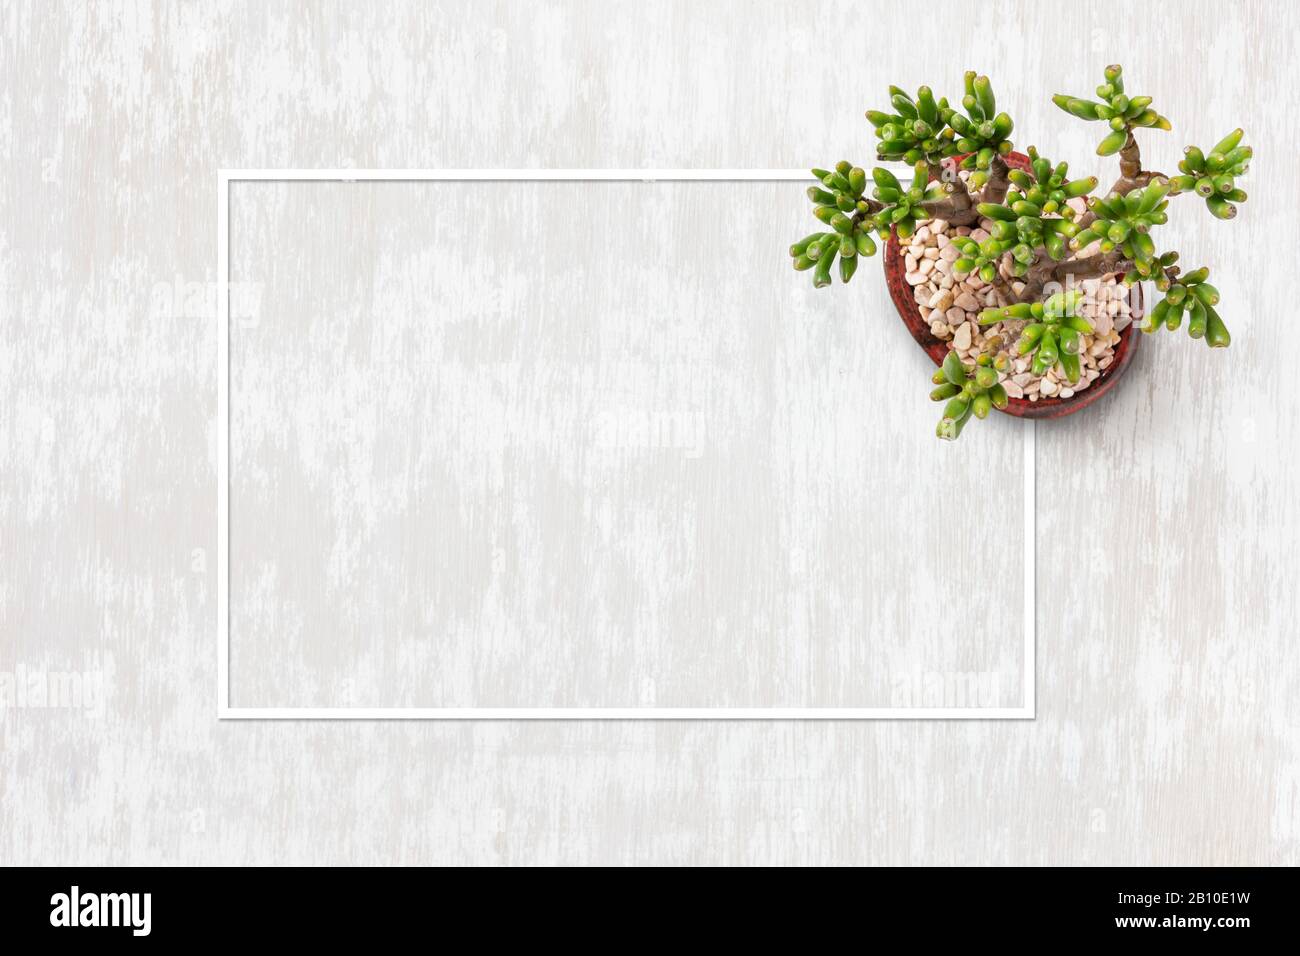 Home gardening lifestyle flat lay image with a small plant and copy space inside cardboard frame Stock Photo